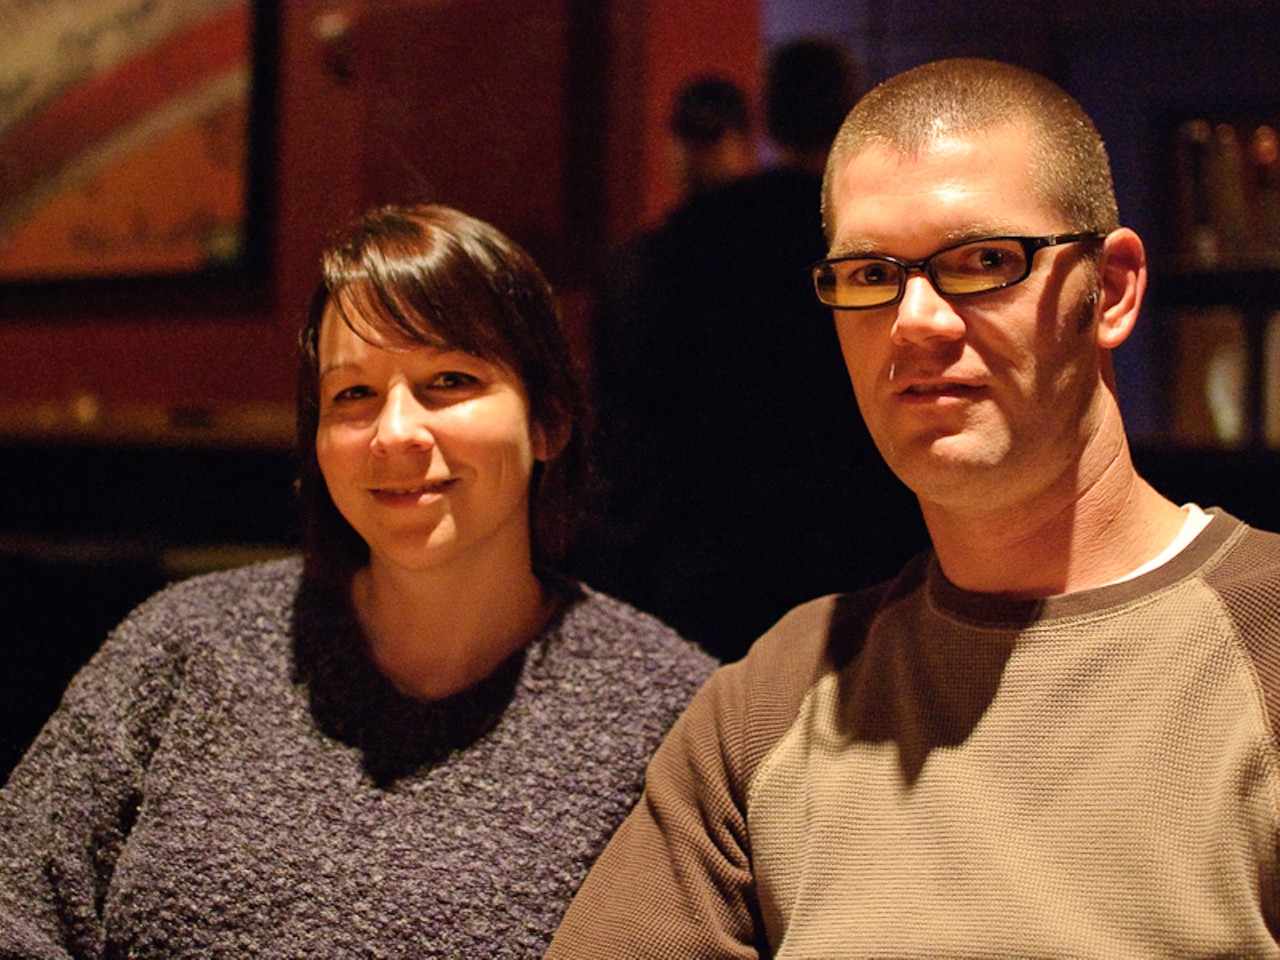 Jenny McGregor and Tony Keck: This was Keck's fifth time seeing Dinosaur Jr. and McGregor's third.